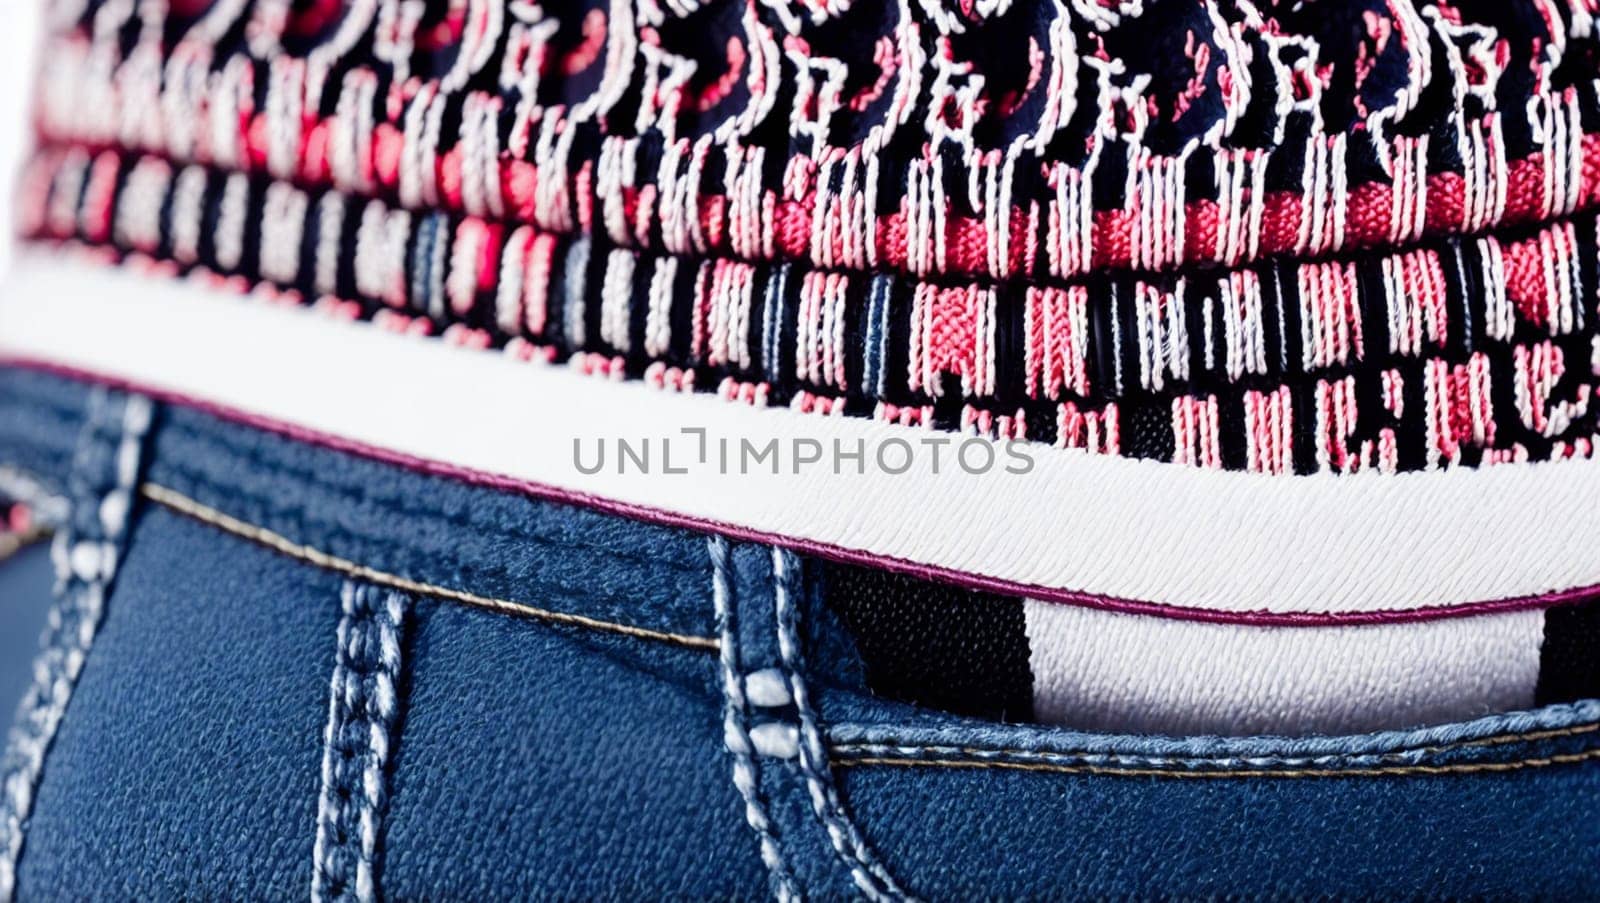 Detail of jeans with black and maroon sweater. by XabiDonostia